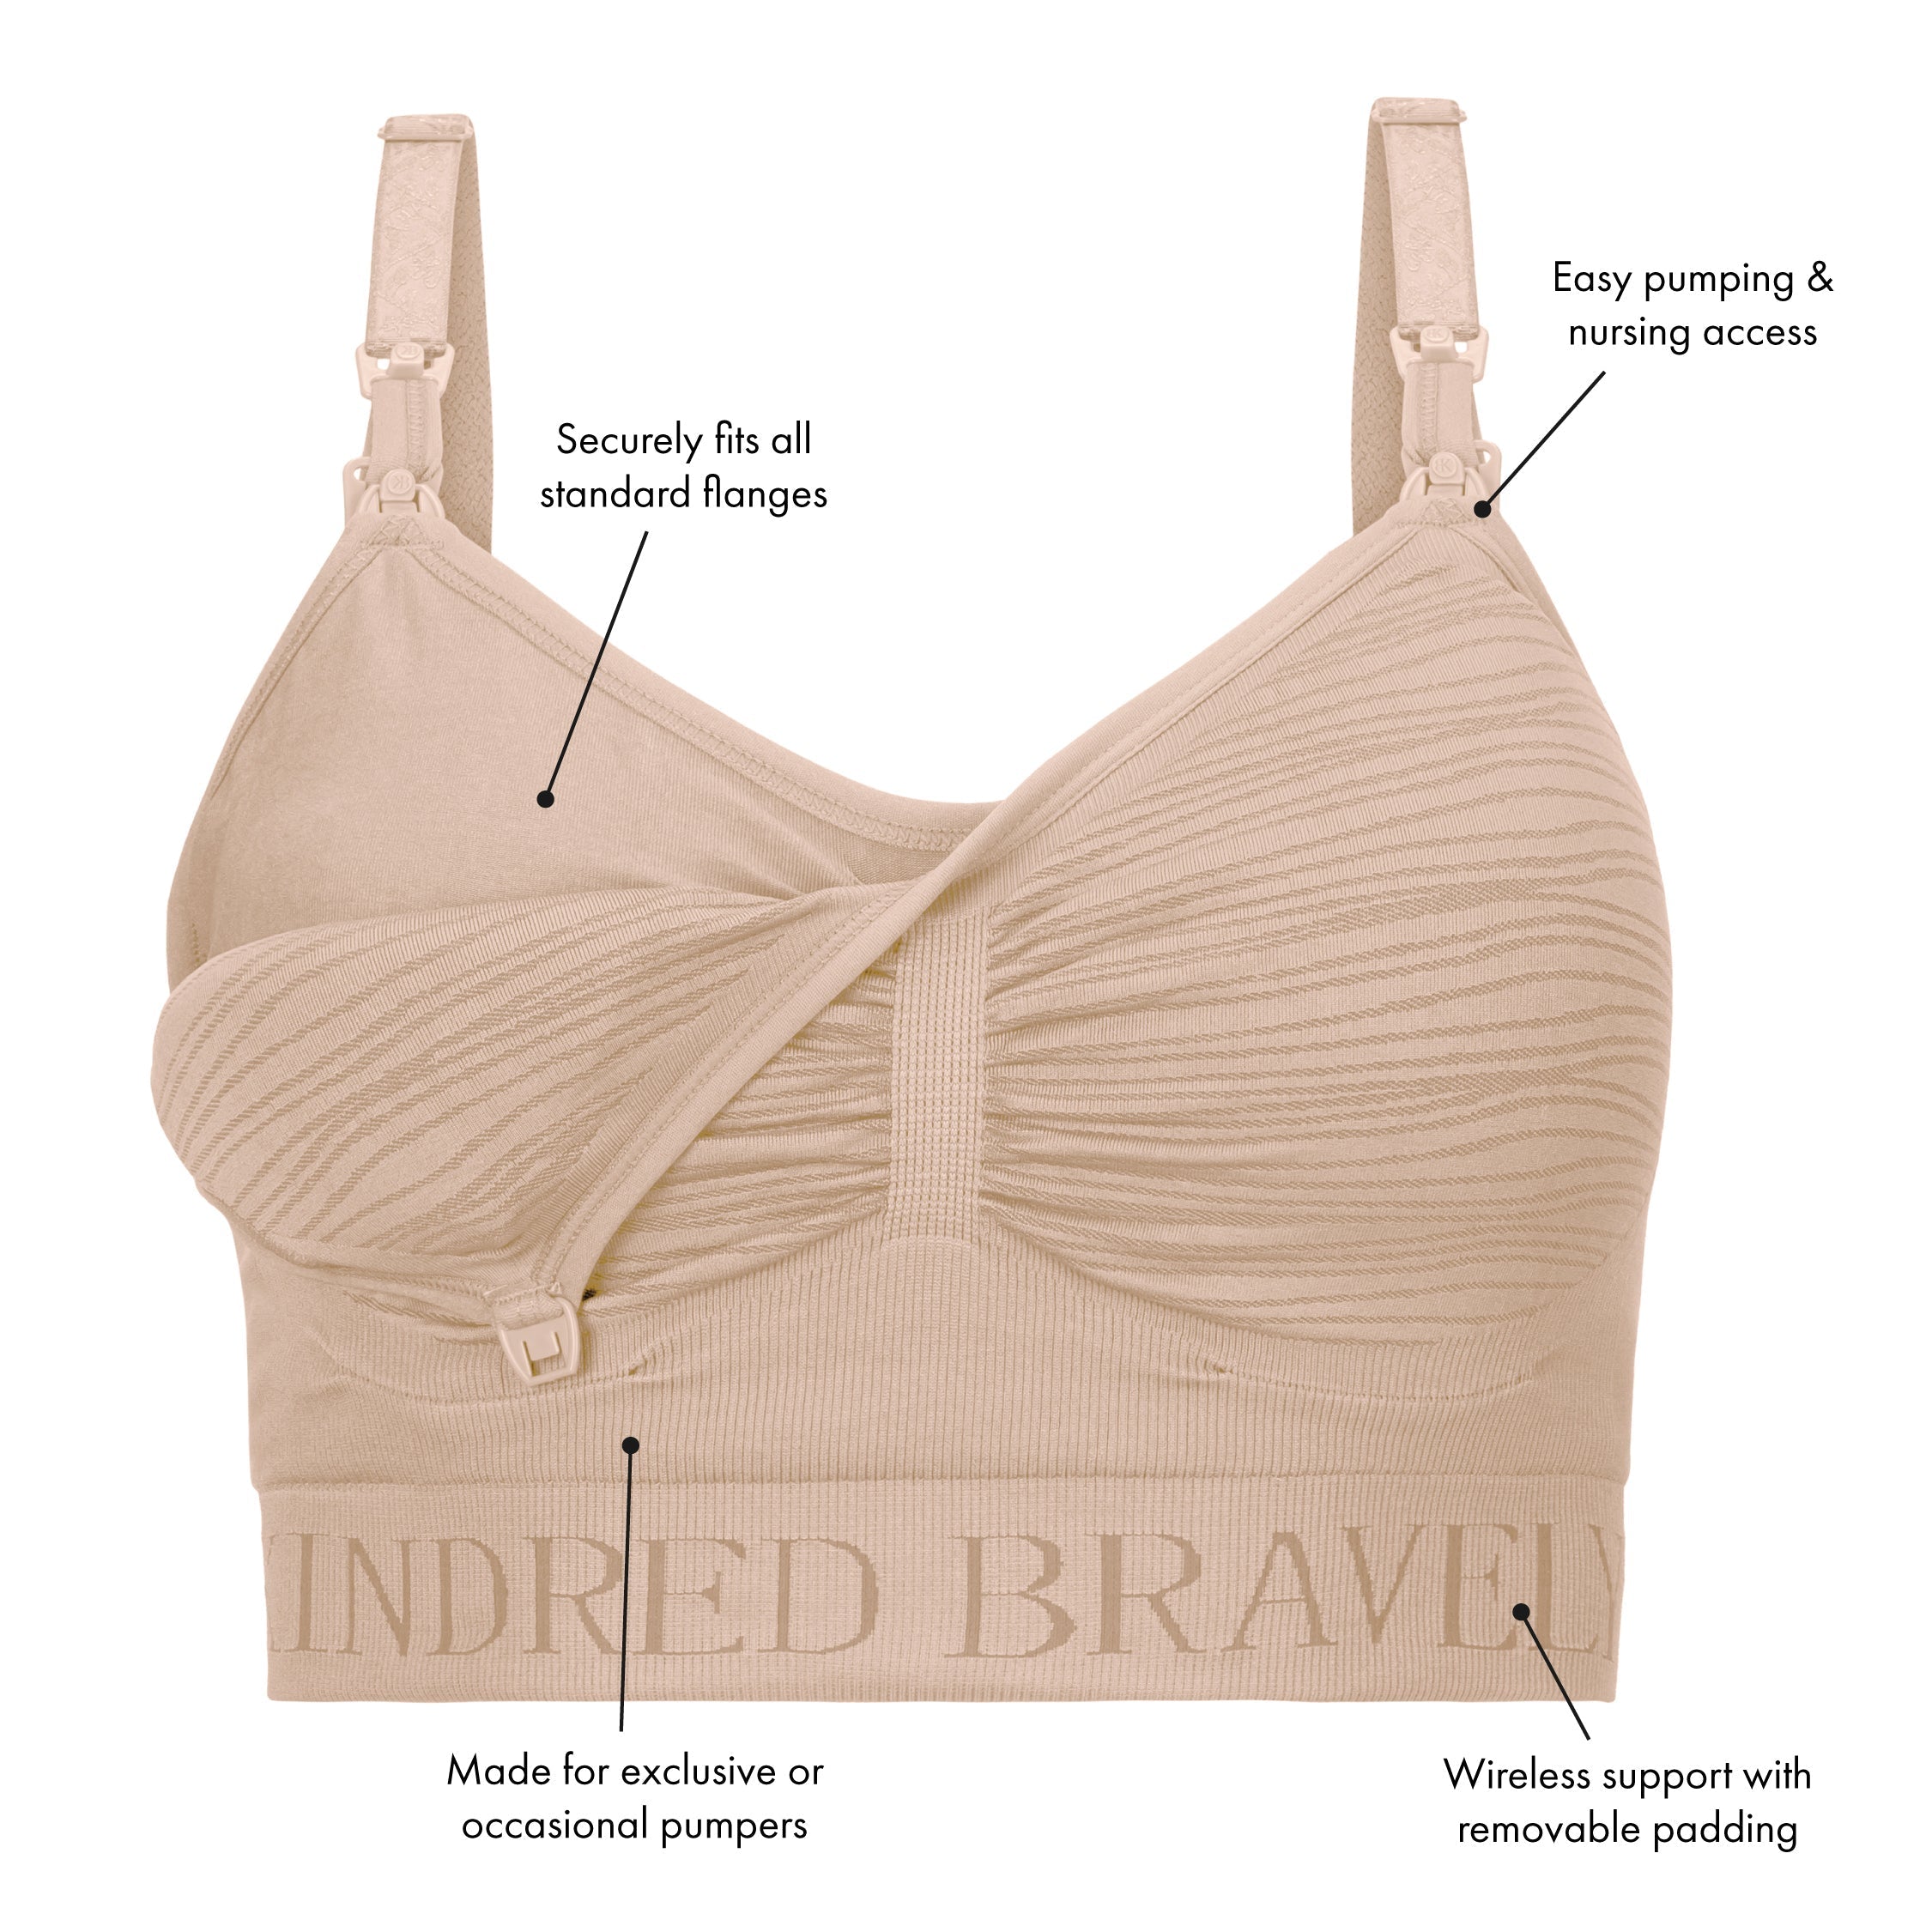 Kindred Bravely Sublime Hands Free Pumping Bra - Beige, Xx-Large-Busty